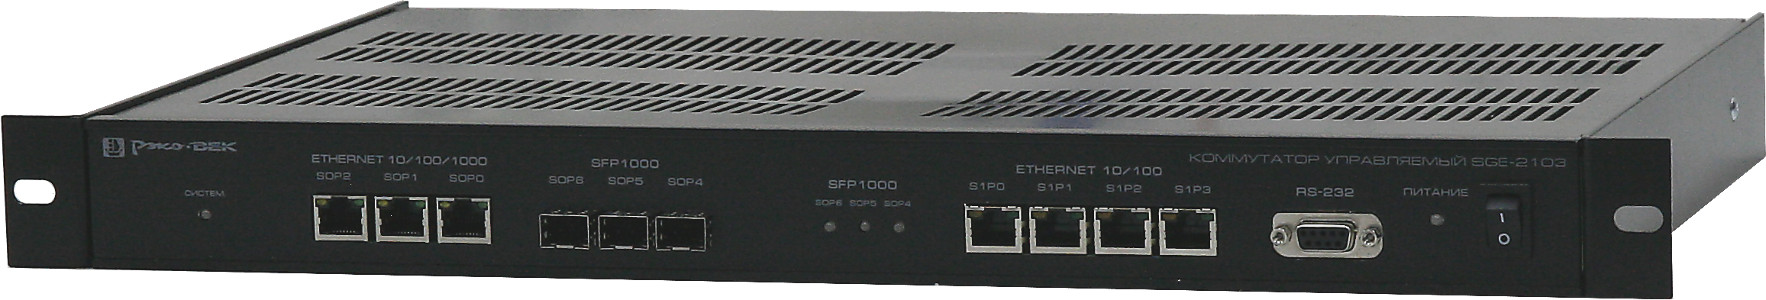 Managed switch with optical ports SGE-2103